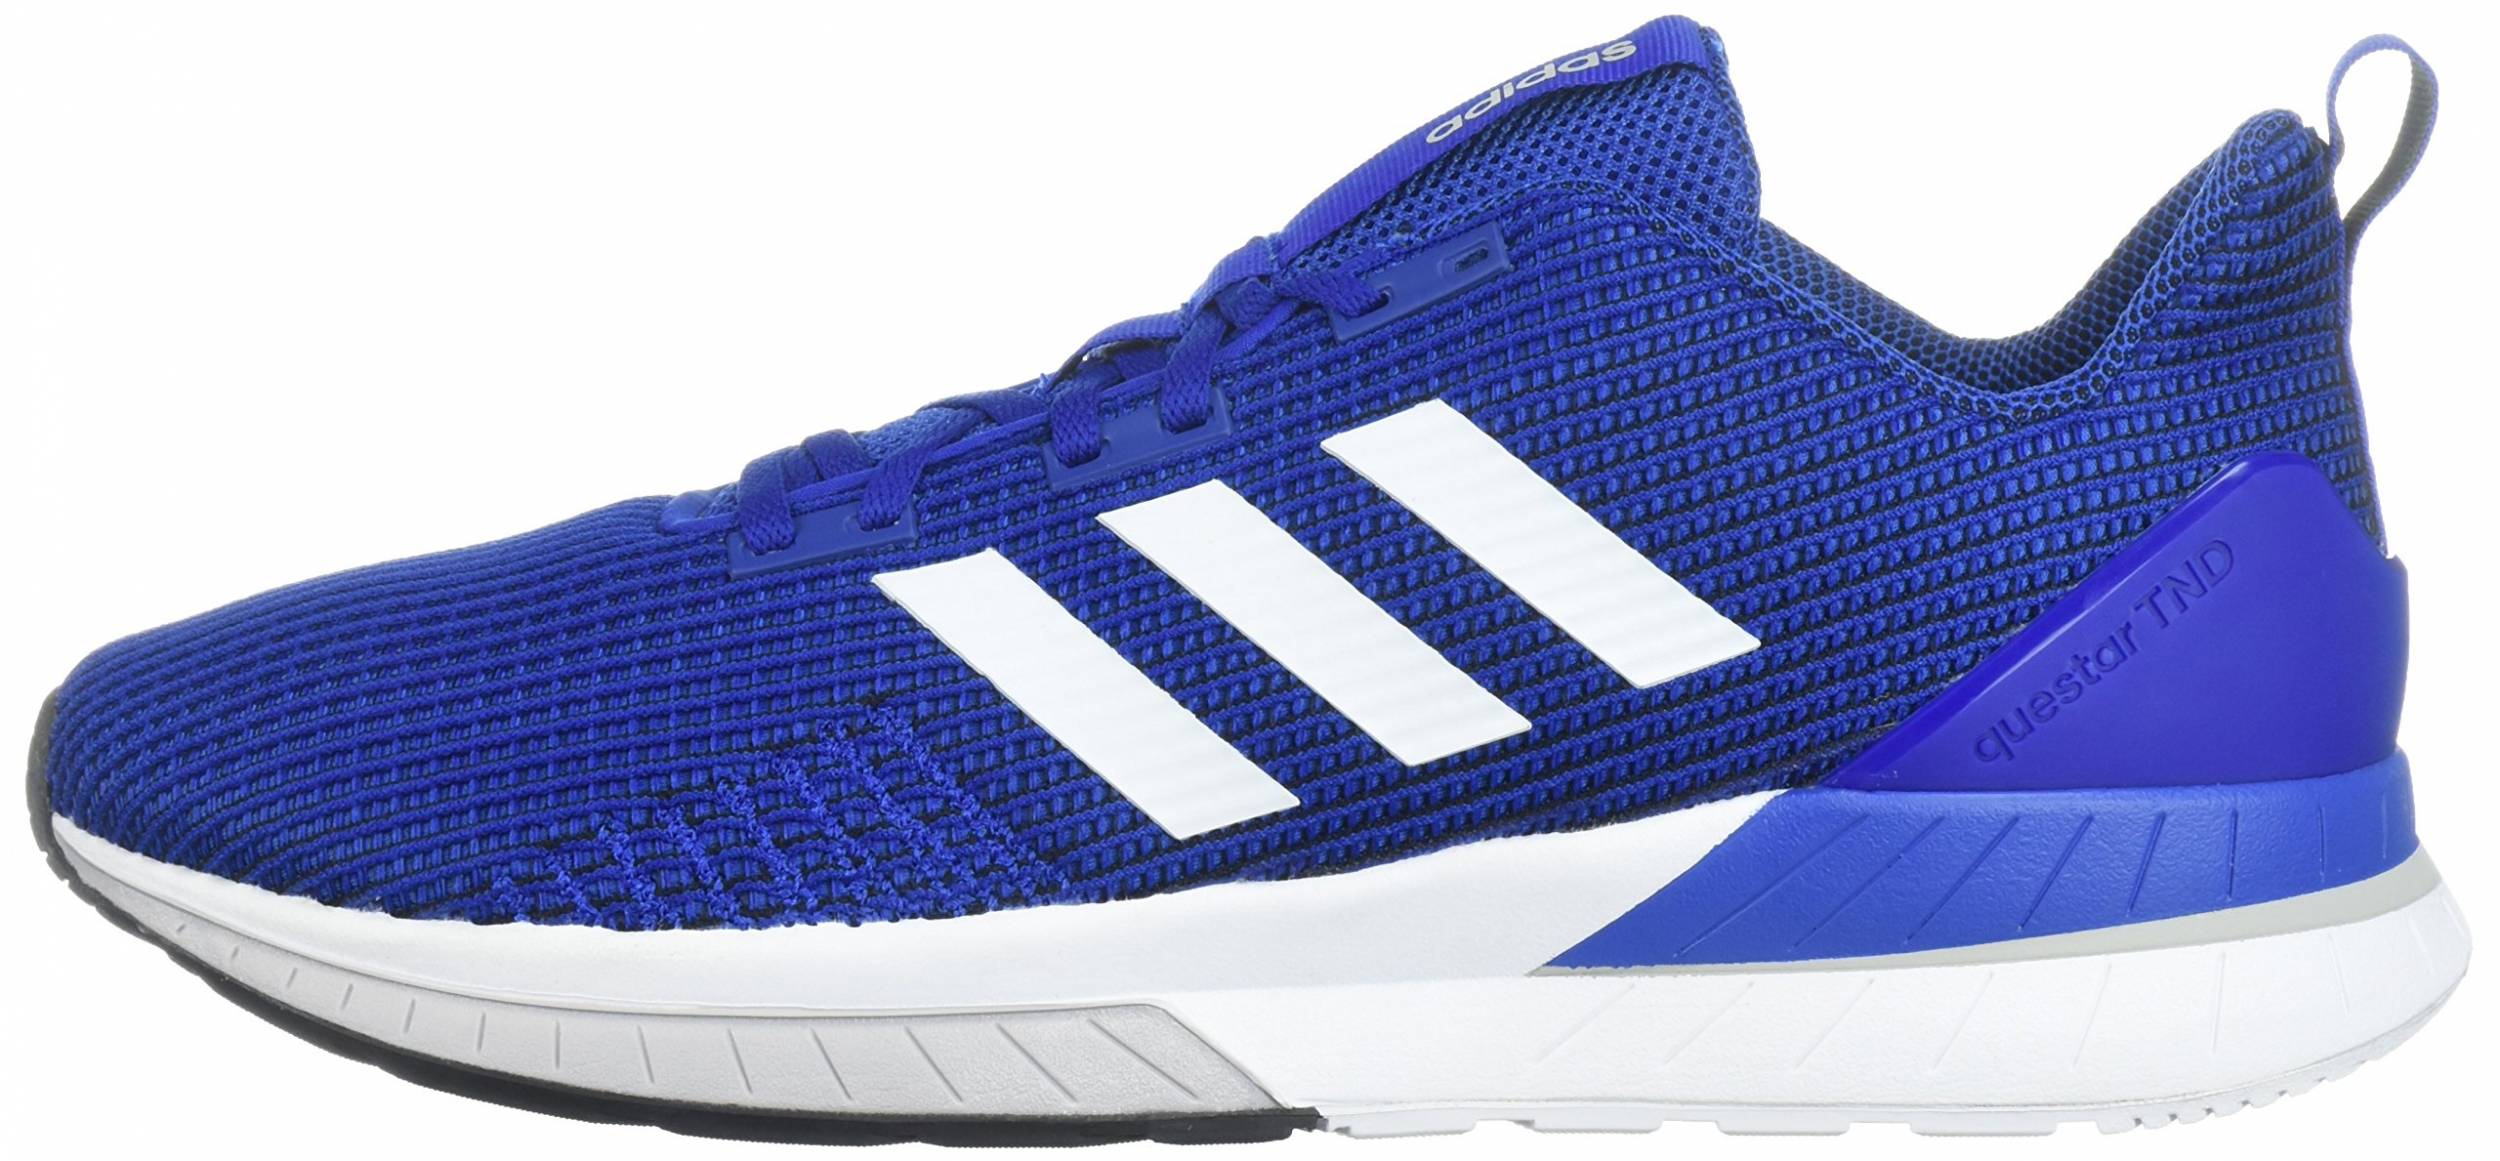 Only £34 + Review of Adidas Questar TND 